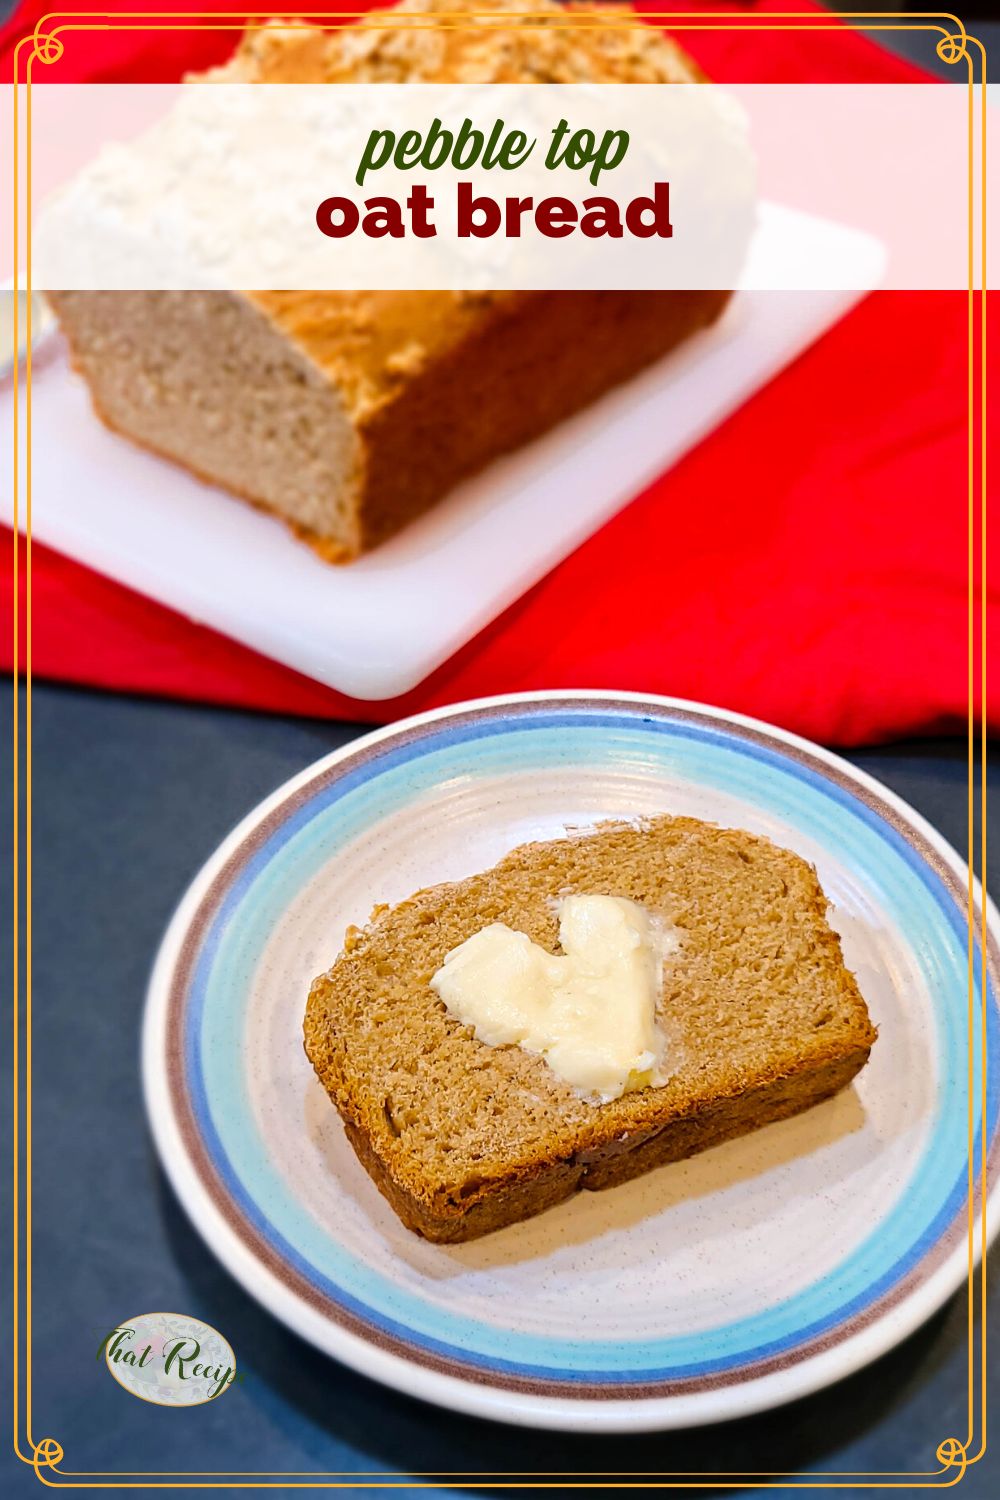 slice of buttered oatmeal bread with text overlay "pebble top oatmeal bread"